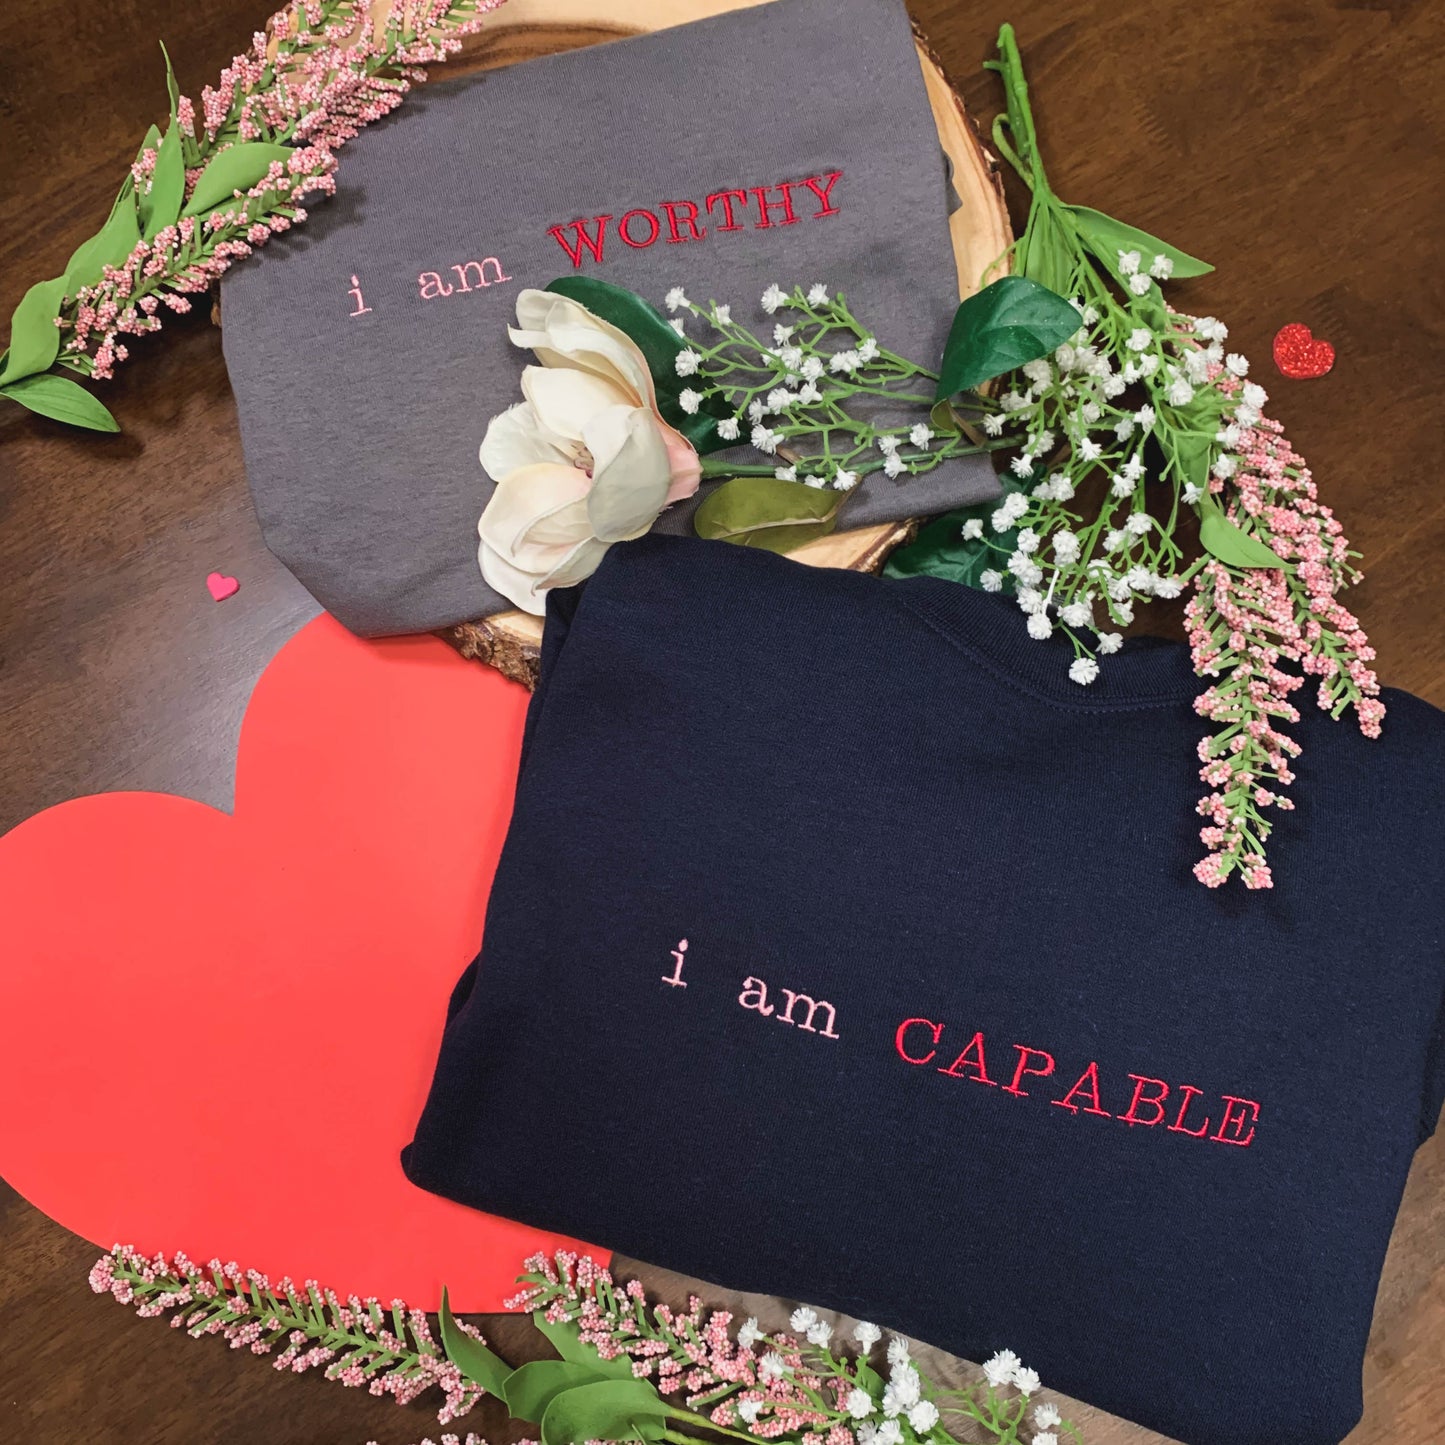 Overhead view of the affirmation clothing items, both folded with pink and white flowers around. The affirmation t-shirt is shown in gray with the embroidery "i am WORTHY" in pink and red. The affirmation crewneck sweatshirt is shown in navy blue with the embroidery "i am CAPABLE" in pink and red.